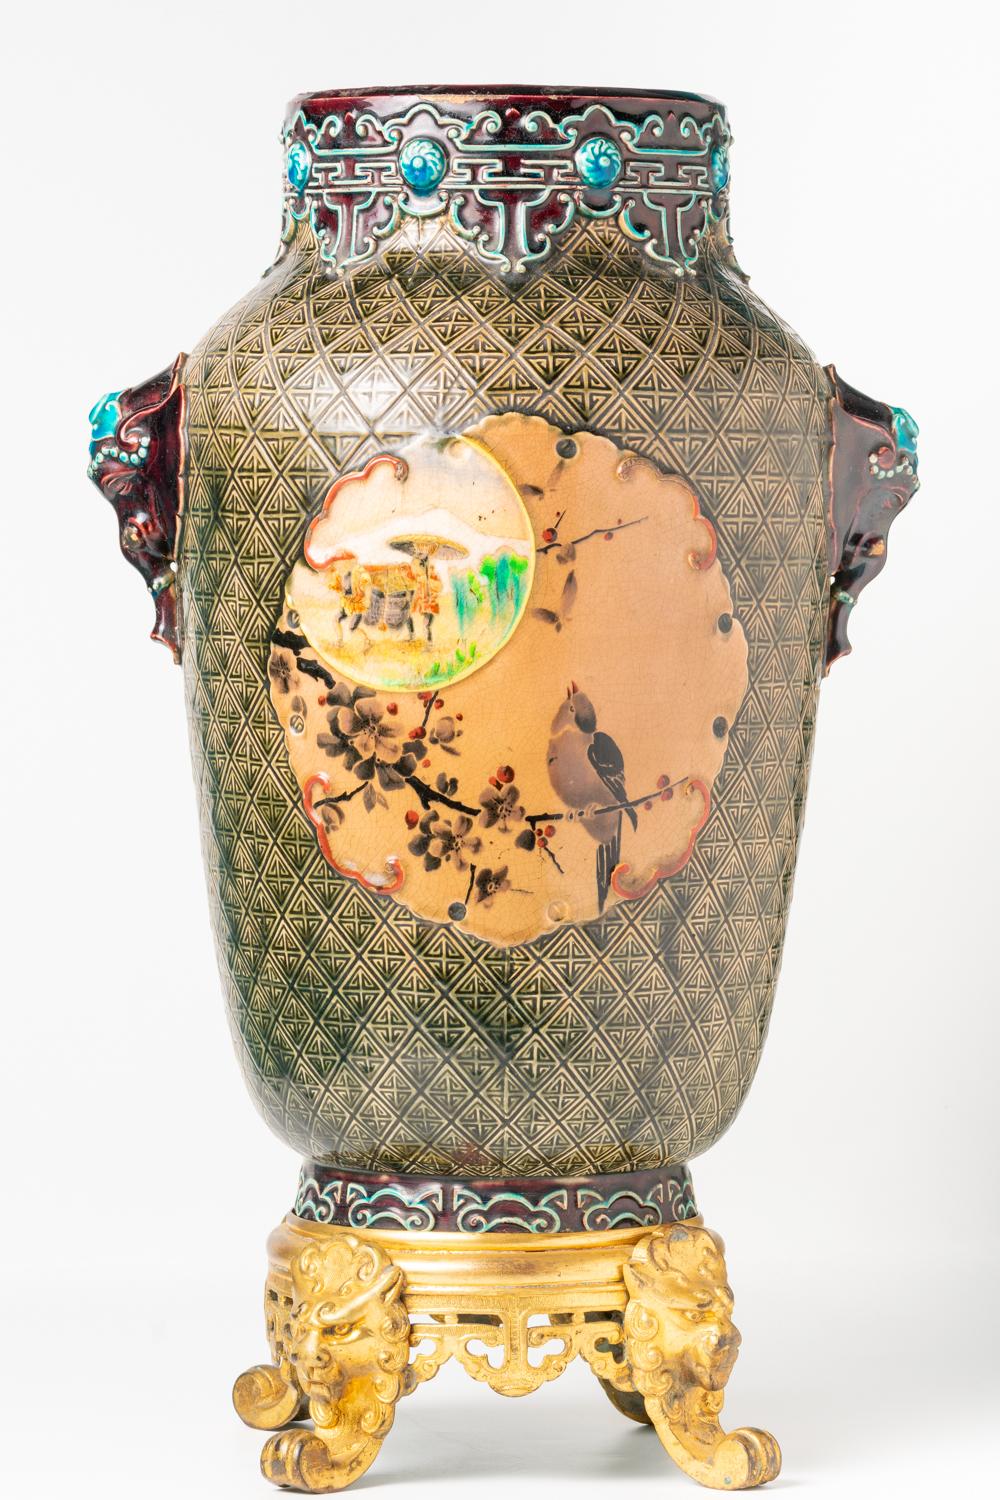 This scarce, impressive and large French vase was realised in Bordeaux by the worldwide renowned Jules Vieillard & Co and dated between 1880-1895 when the ceramic company's favourite designs and techniques were developed. This bulbous cylindrical